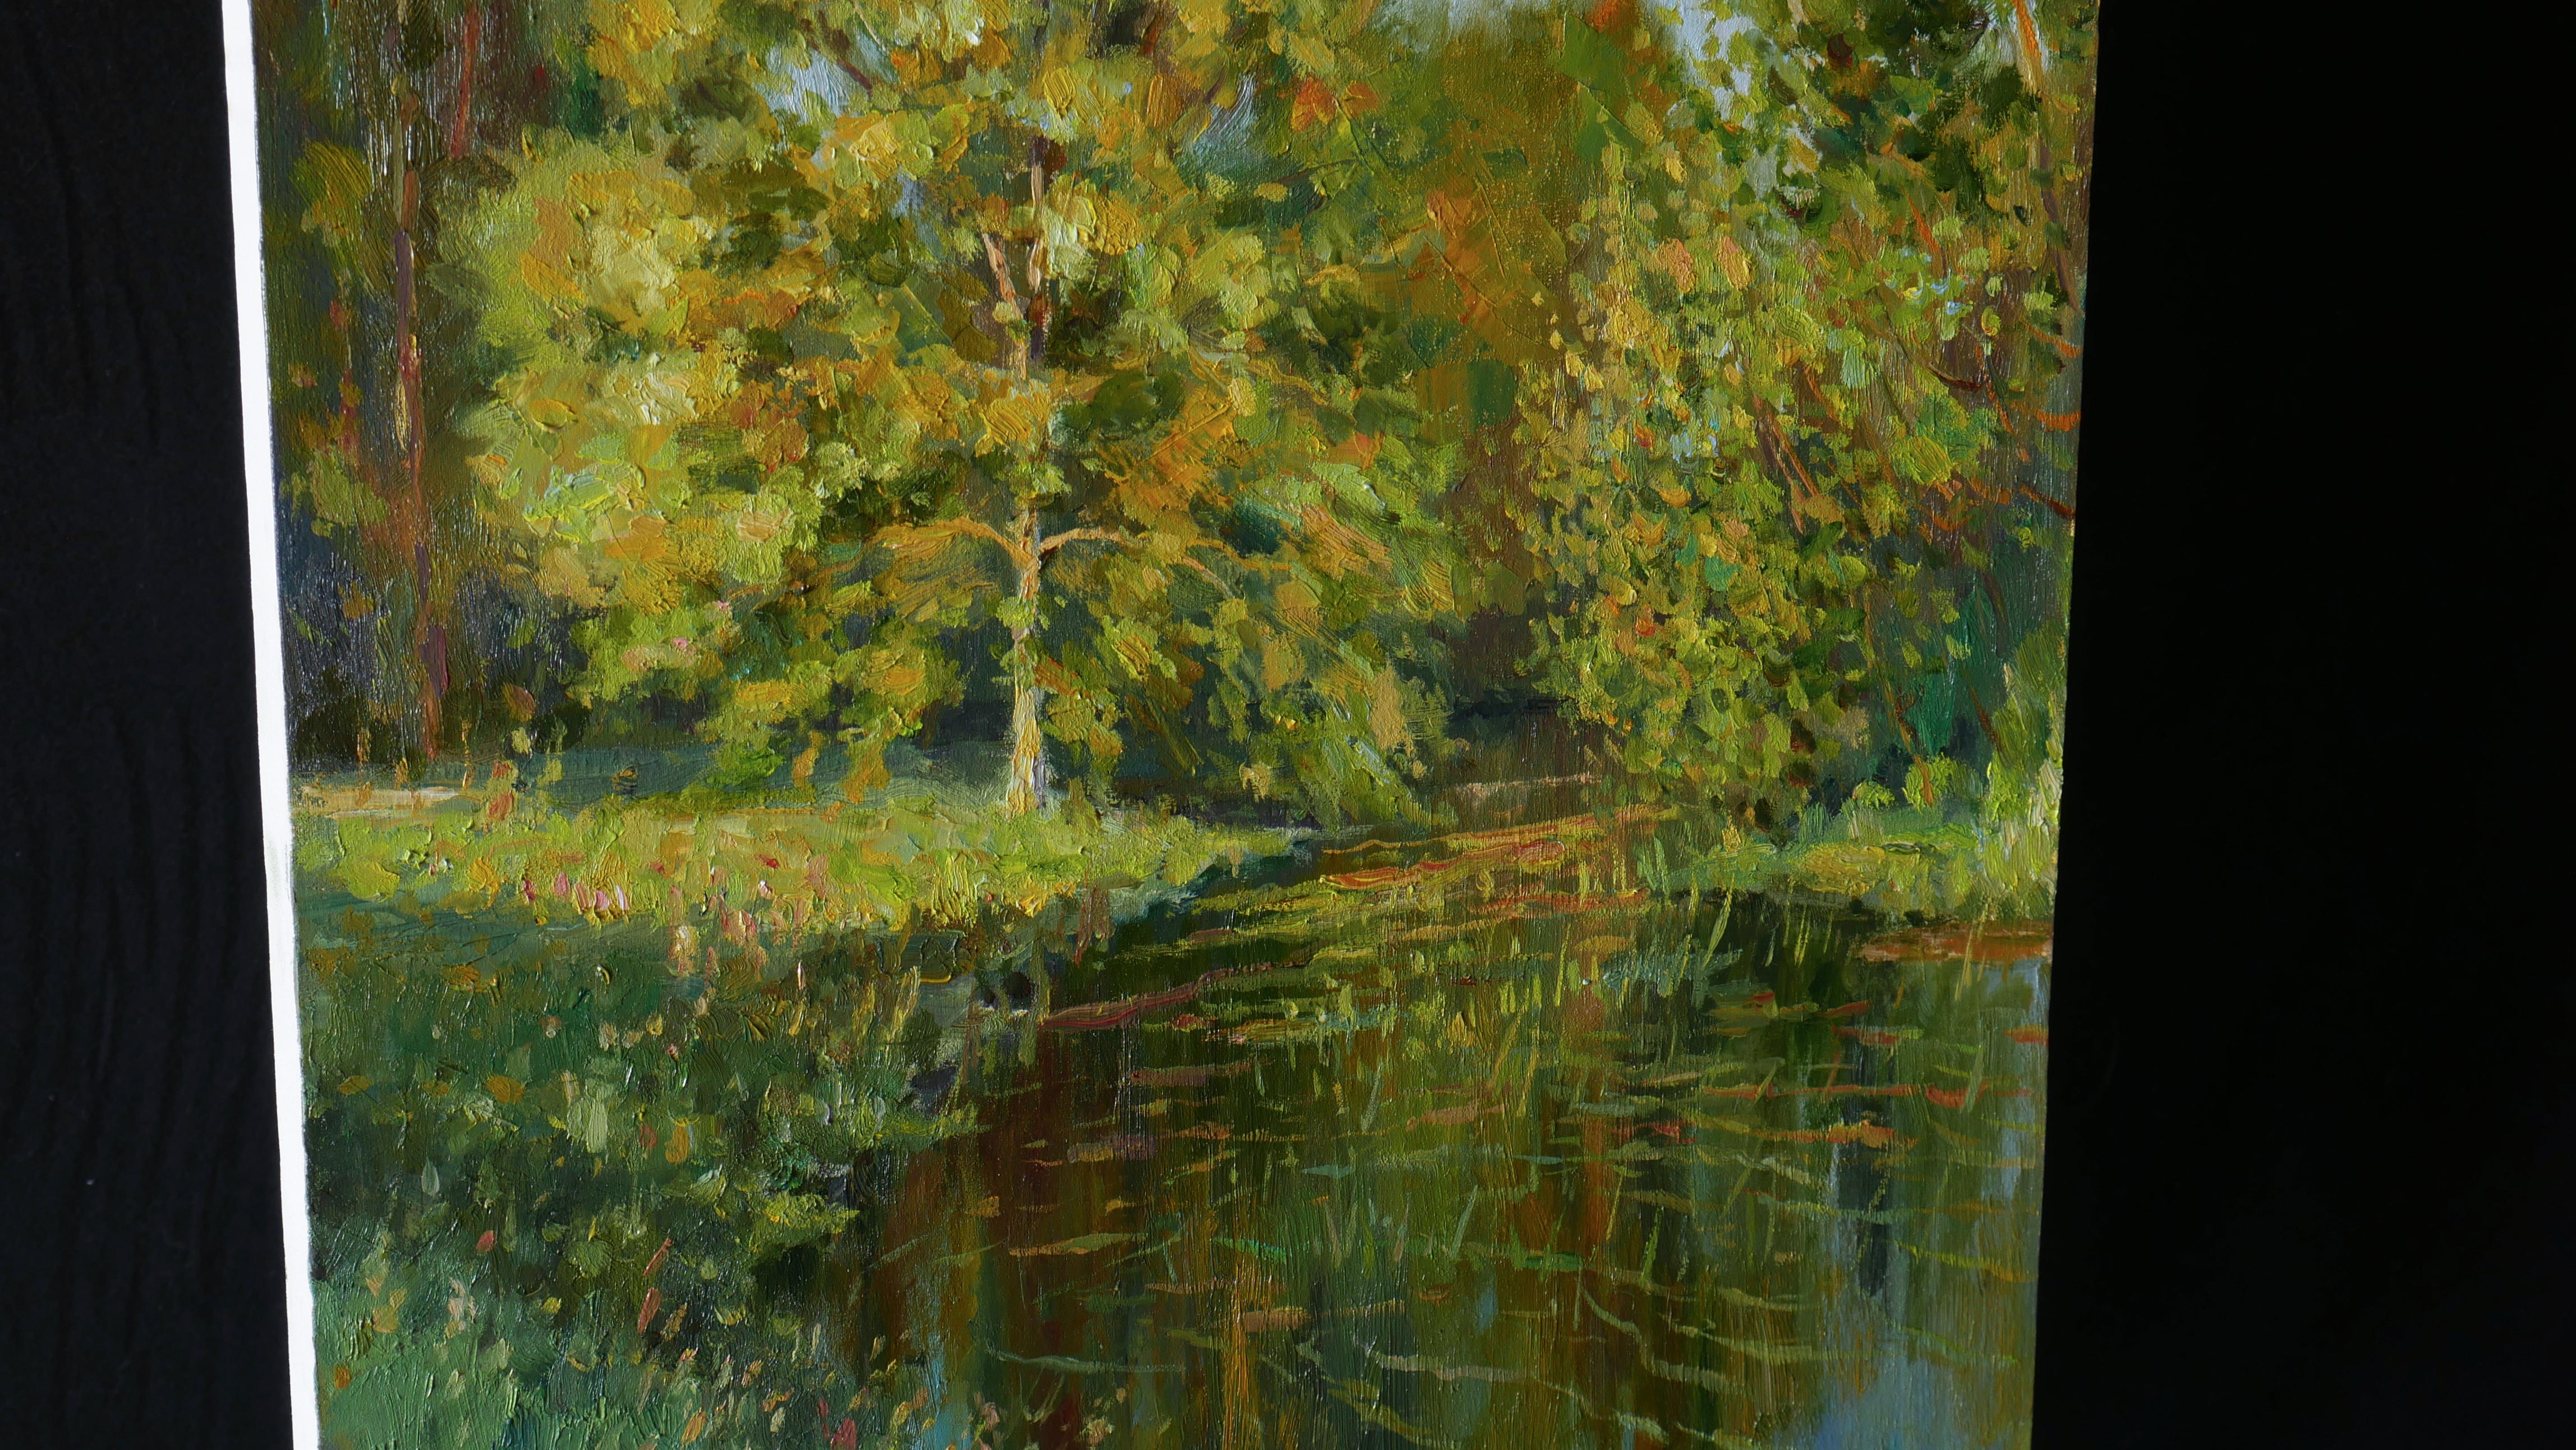 A sunny summer impressionistic landscape is painted en plein air, the artwork is created in different green colours, combinations of warm and cold shades are professionally captured by the artist. The bright and lively painting is a wonderful